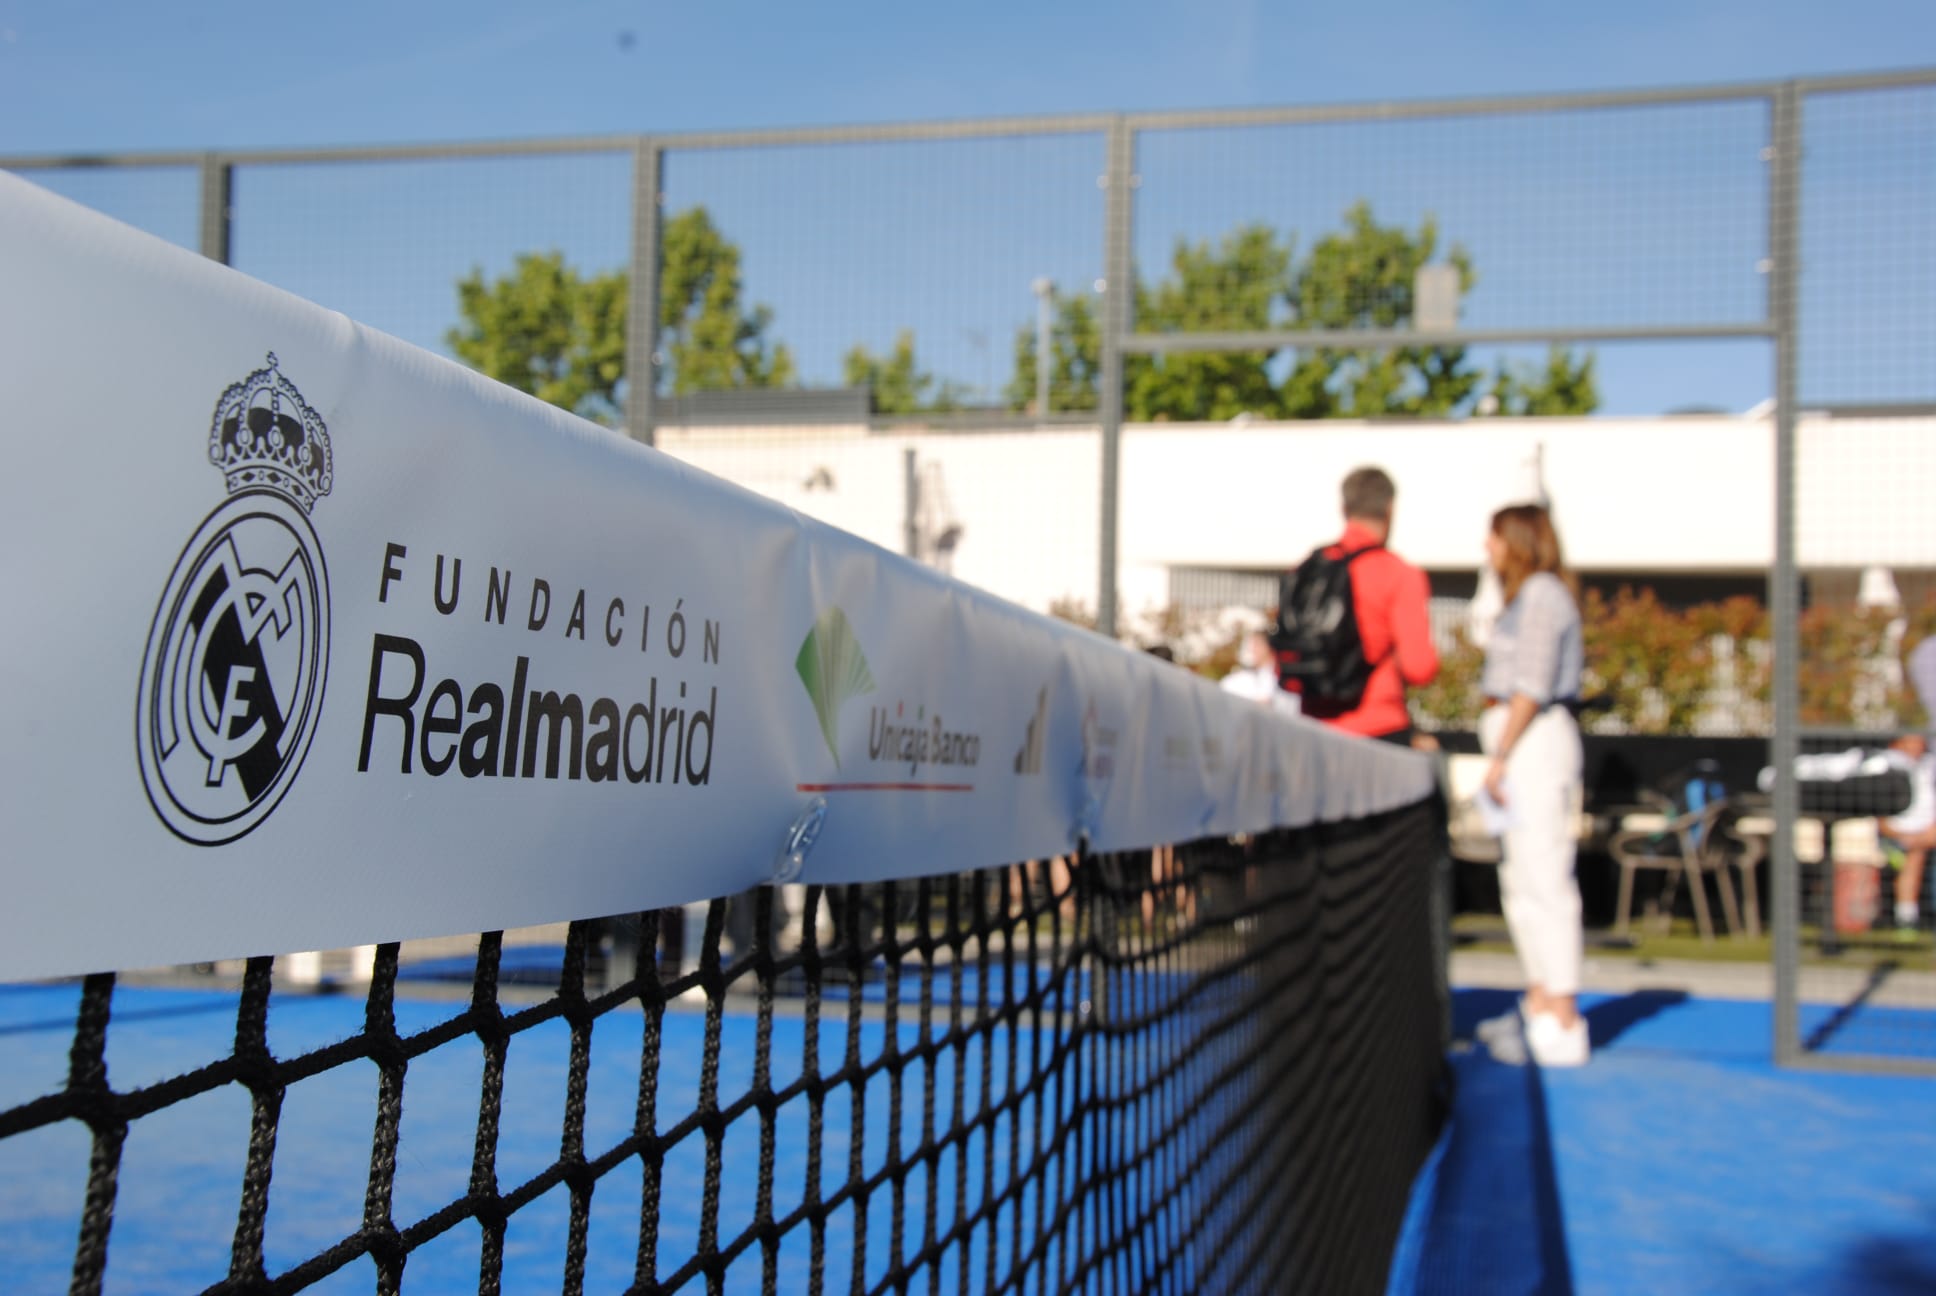 The 4th Padel Charity Tour of the Real Madrid Foundation by Unicaja Banco arrives in Las Rozas